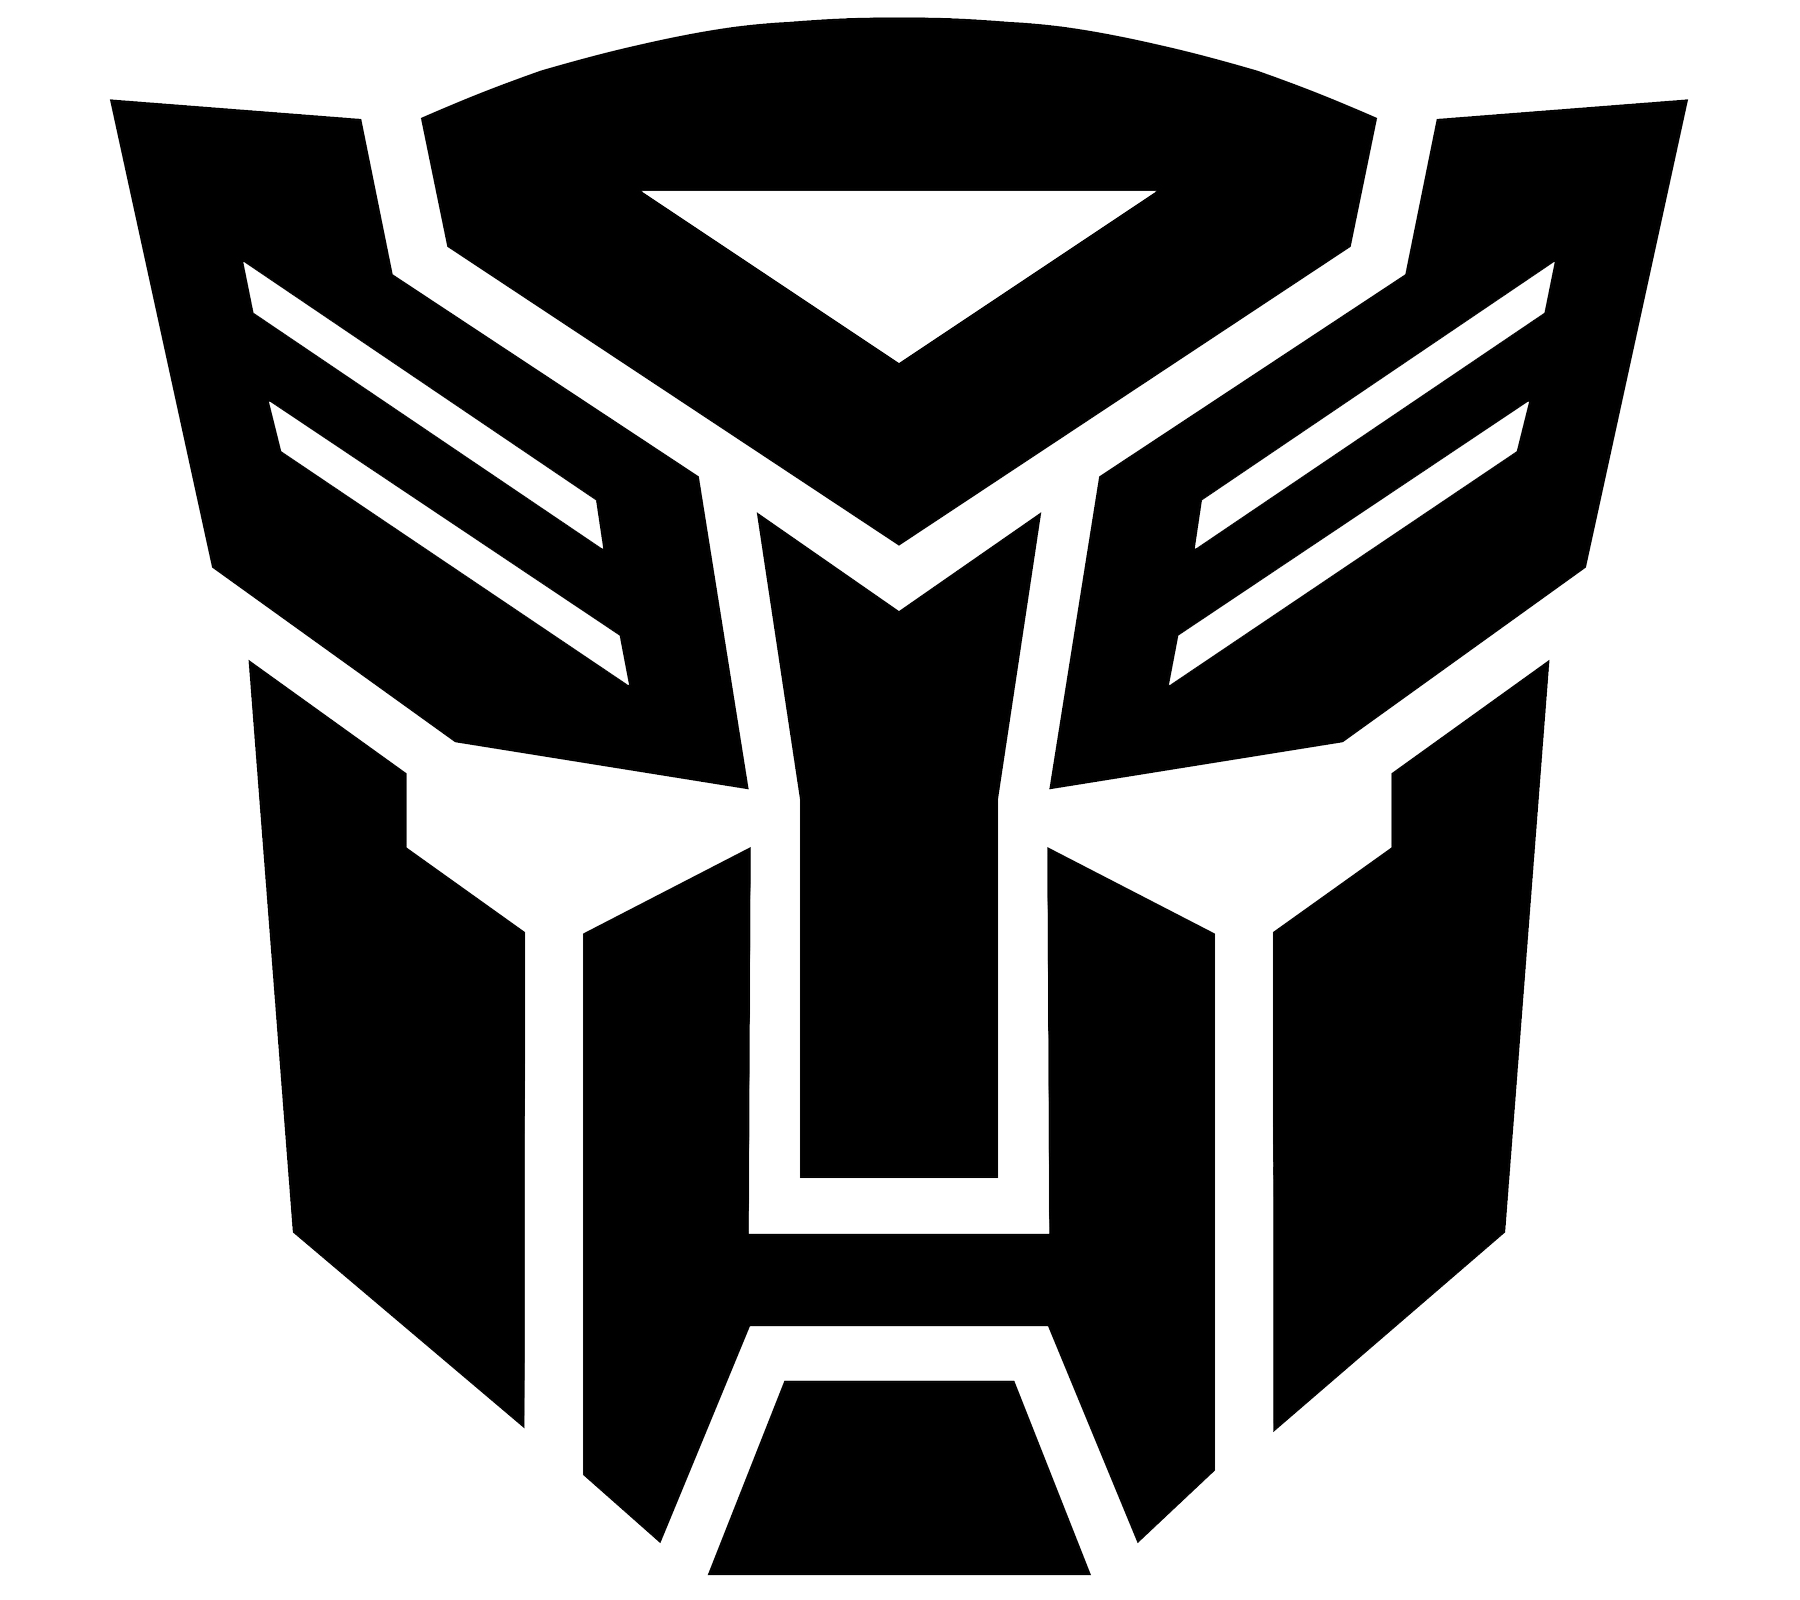 Transfomer Logo - Meaning Transformers logo and symbol | history and evolution